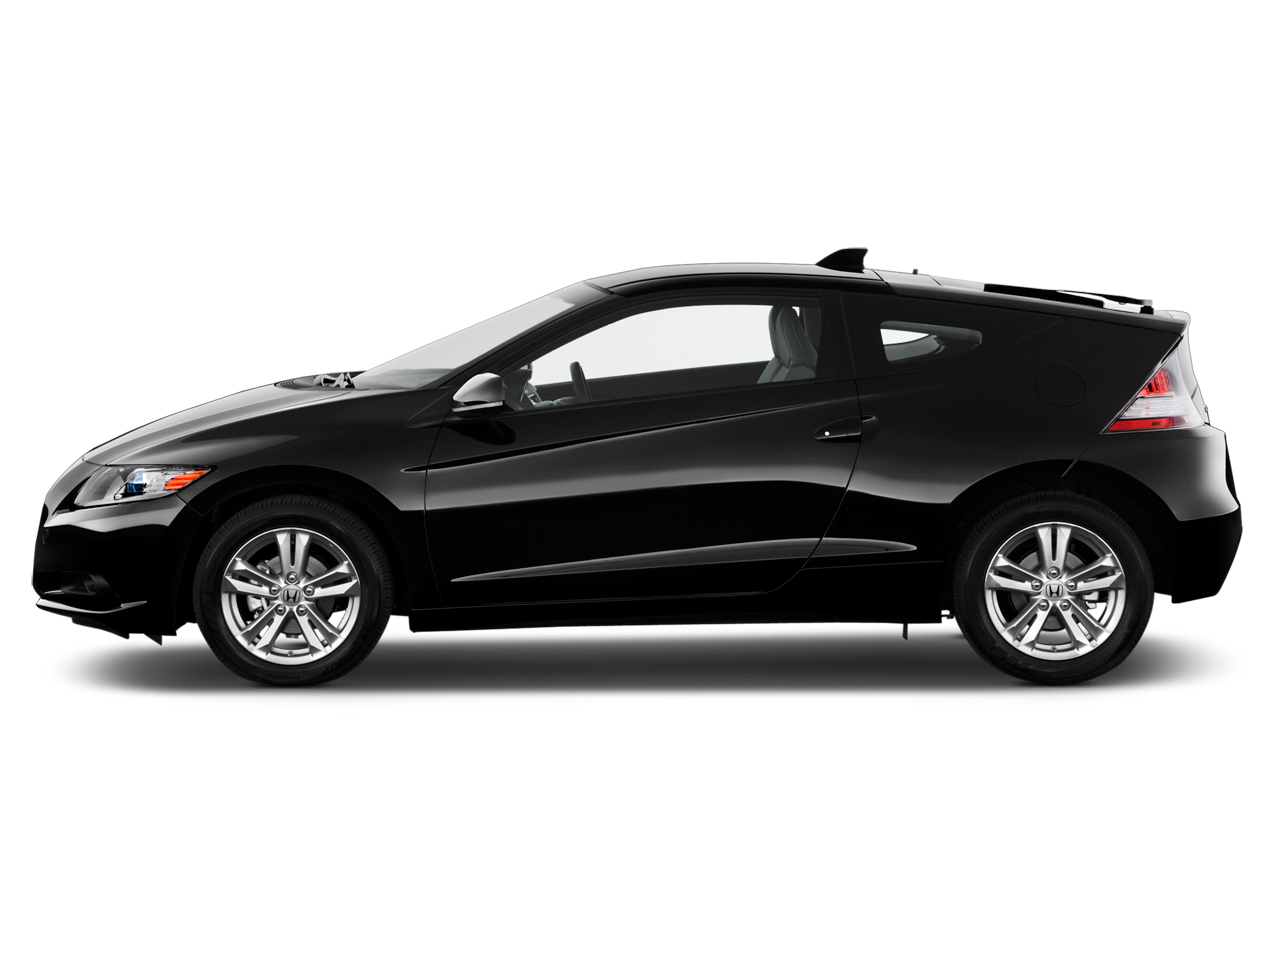 Does the 2016 Honda CR-Z Hybrid Have the Best MPG?